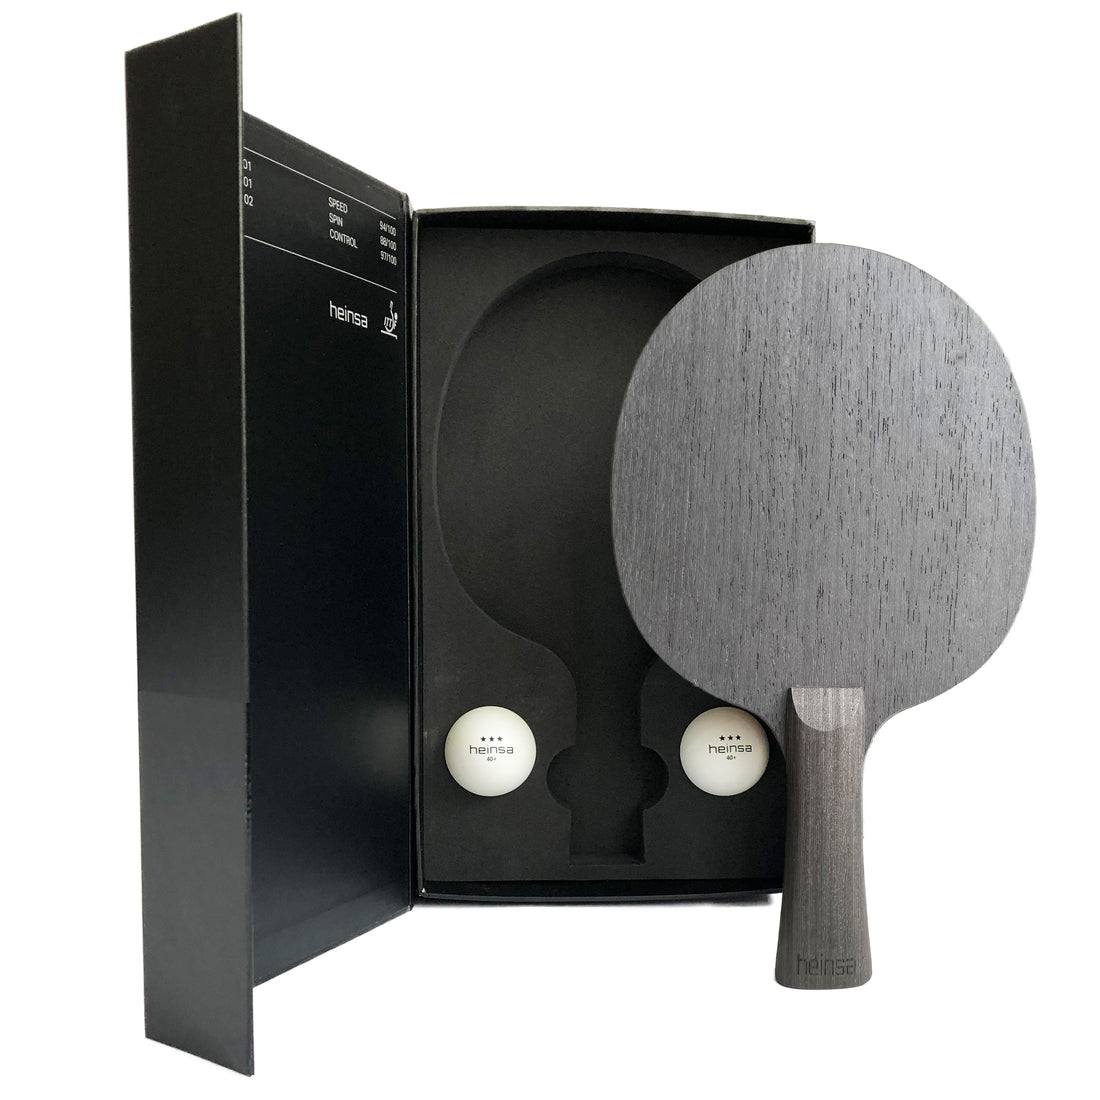 heinsa professional table tennis bat wood made of carbon and light walnut wood (without covering)